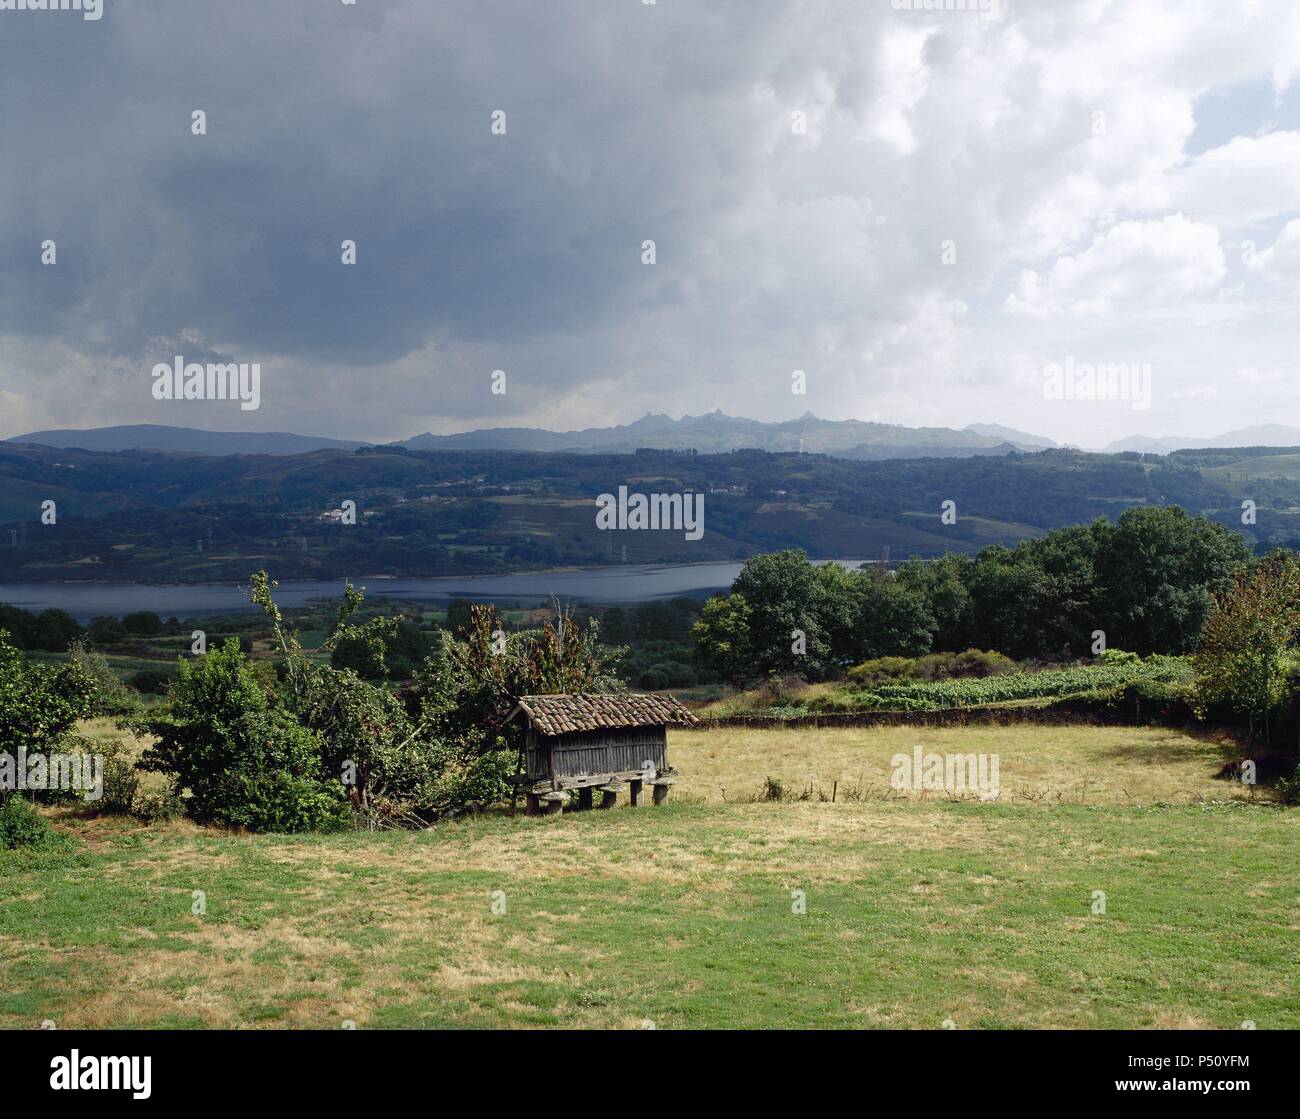 Spain. Galicia. Overview of a typical galician landscape with Reservoir Das Conchas in the background. Near Santa Comba de Bande. Stock Photo